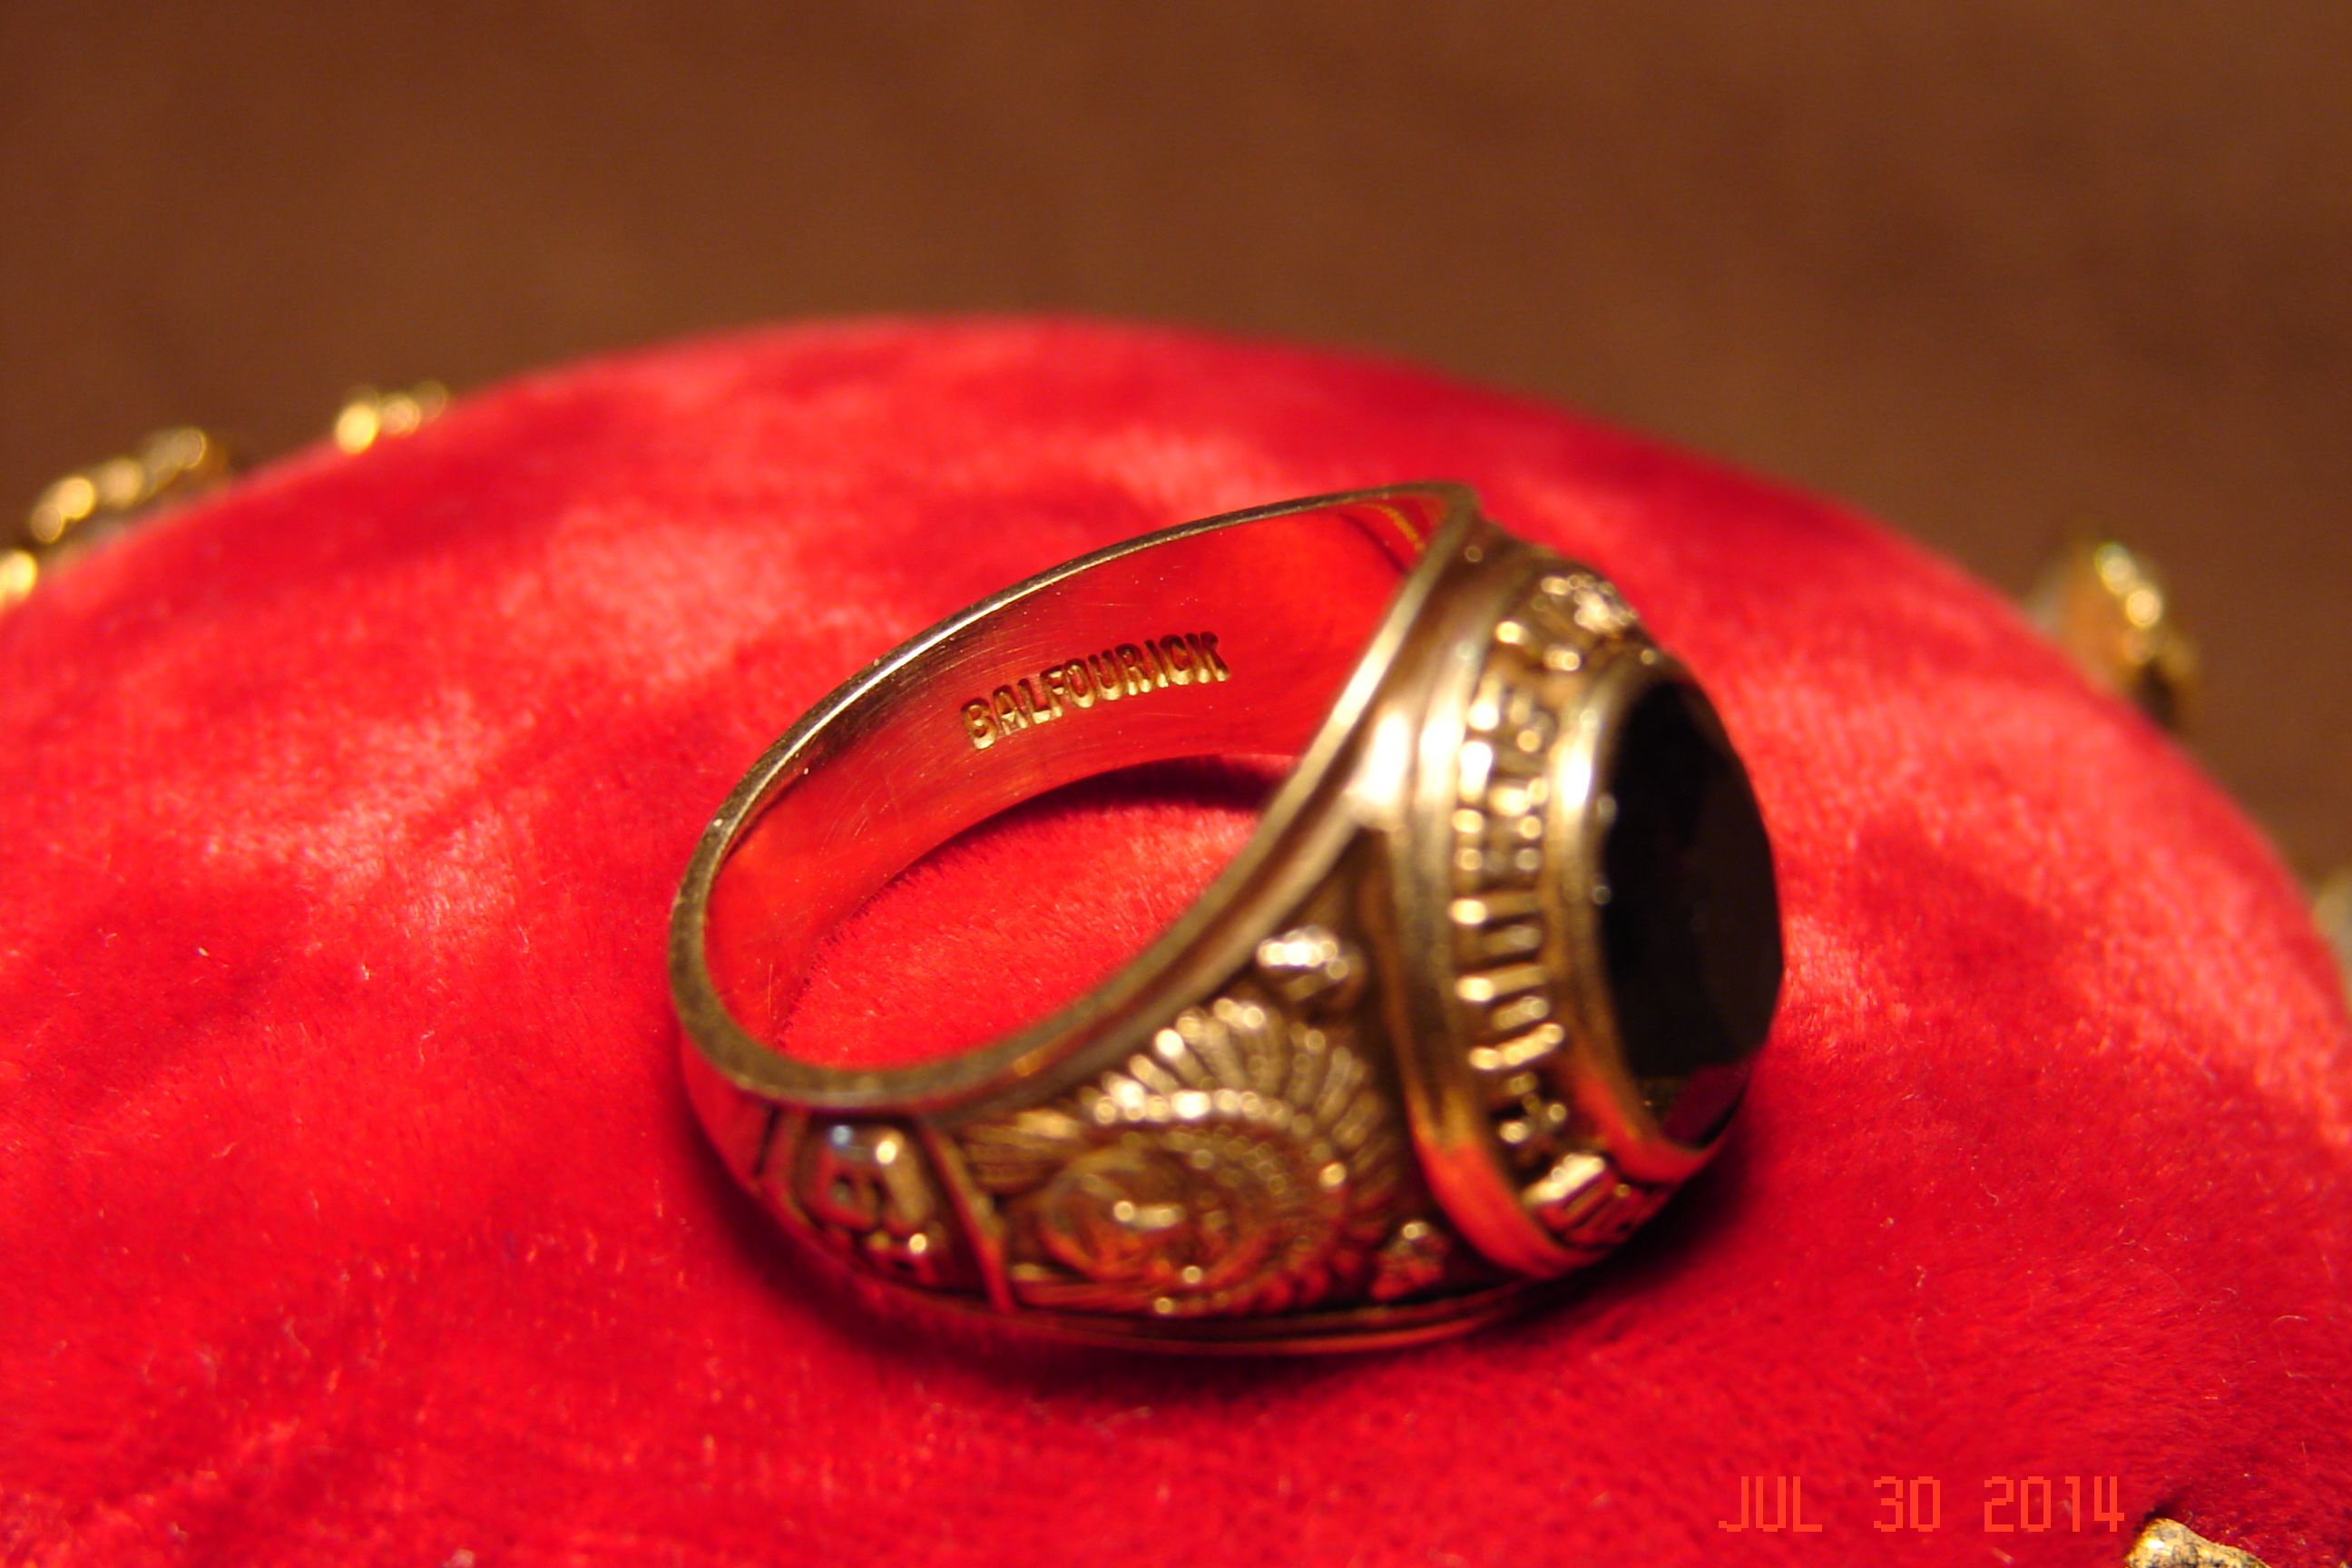 14K Gold 1969 Class ring. Found ring in 2014.   Owner tracked down and returned to her in 2014.  She lost it in 1969 brand new.